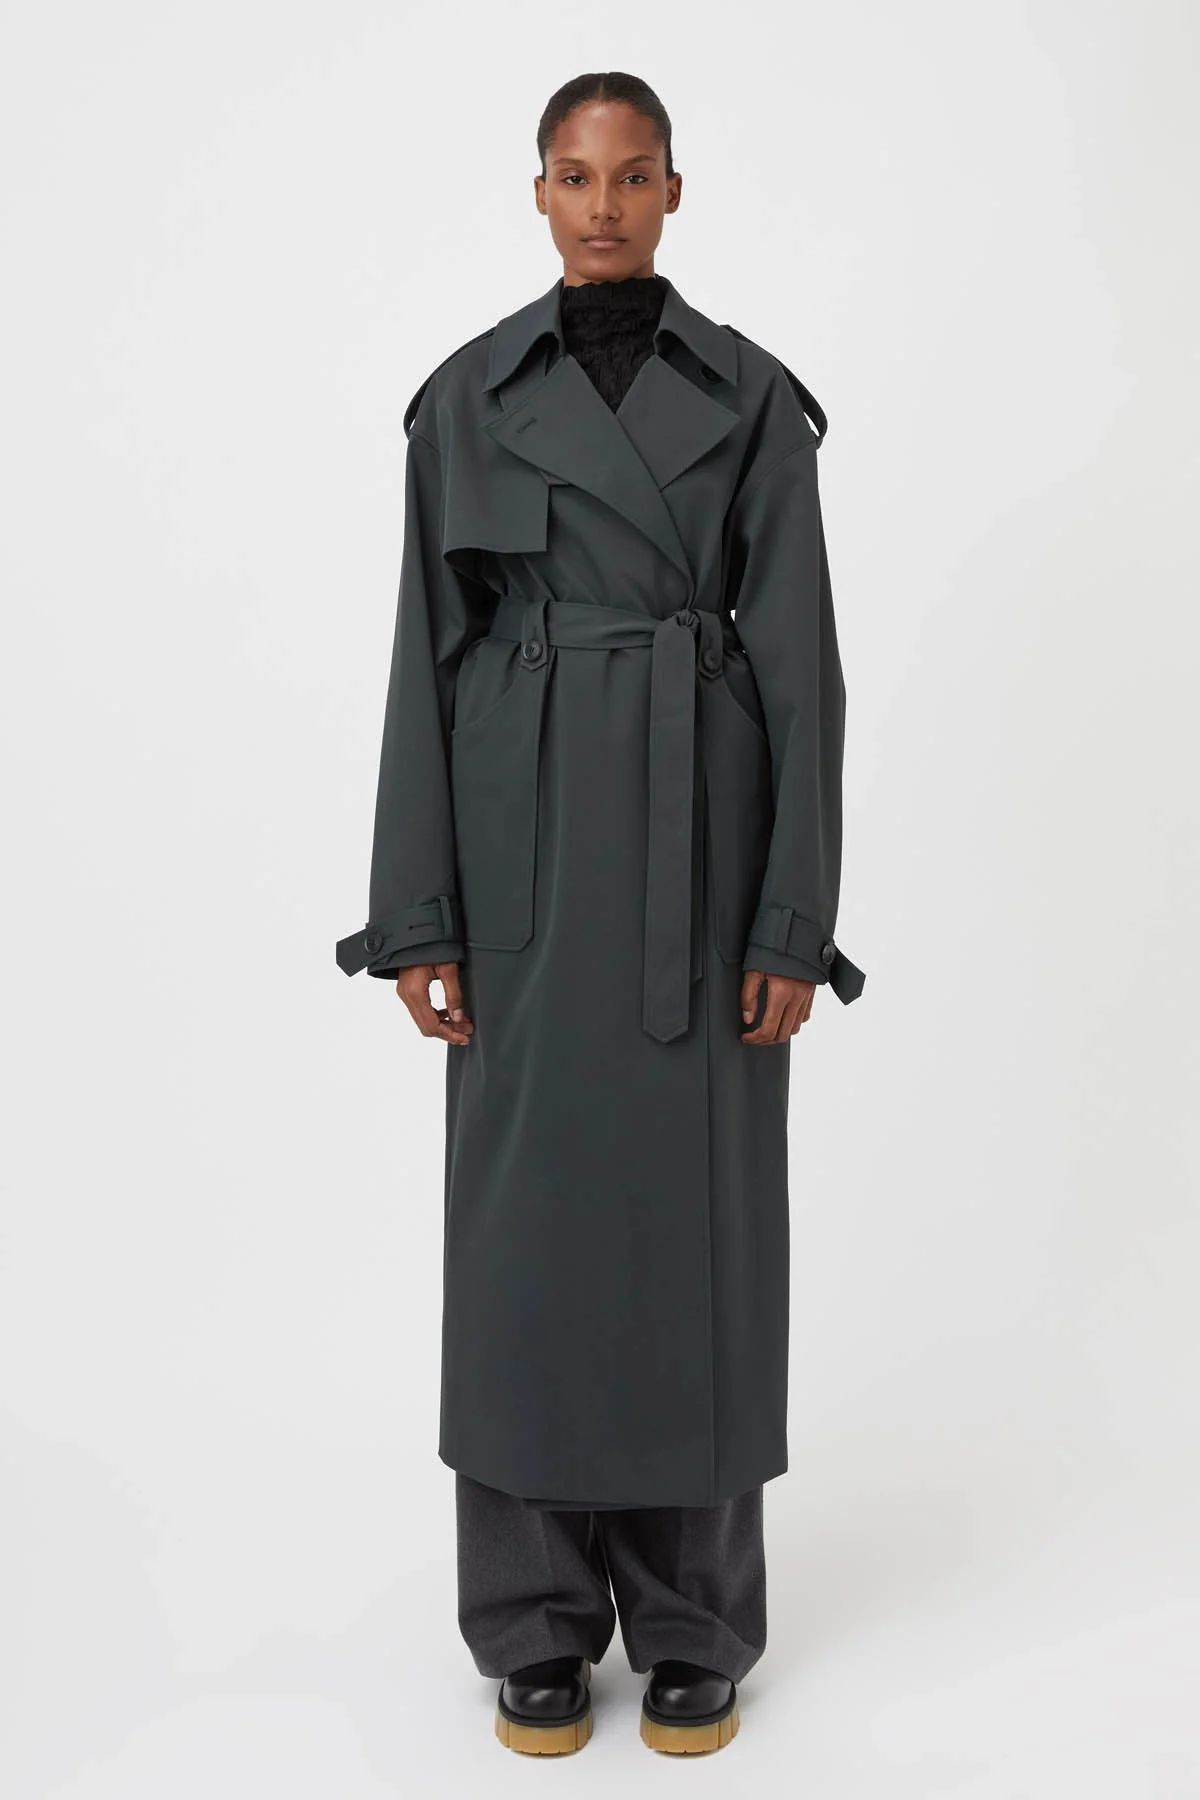 CAMILLA AND MARC Reyes Trench Coat in Charcoal. | Camilla and Marc